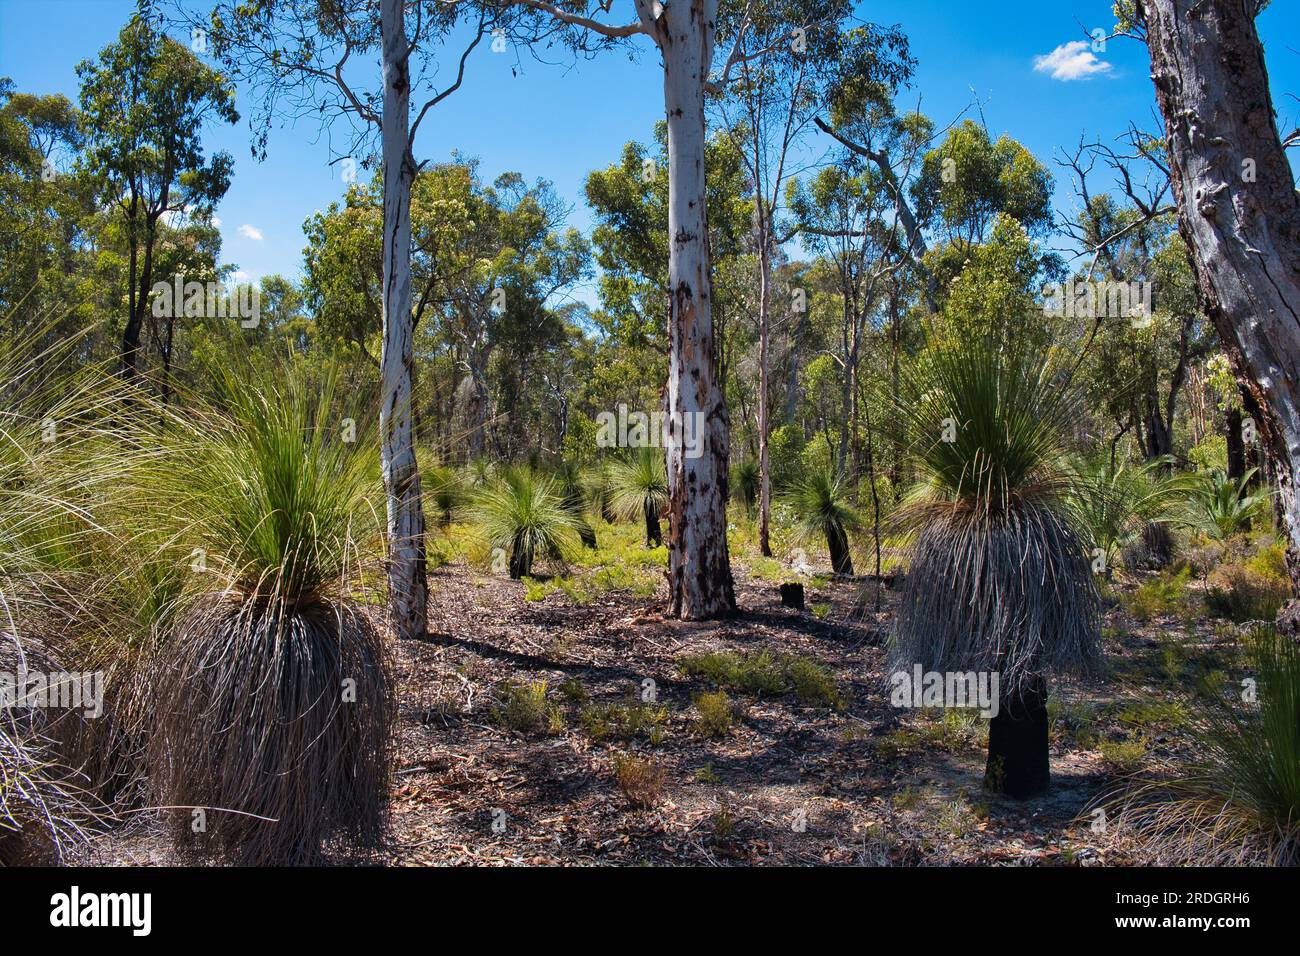 Grass trees (Xanthorrhoea) with black trunks in native forest with jarrah, marri and powderbark trees in Avon Valley National park, Western Australia Stock Photo